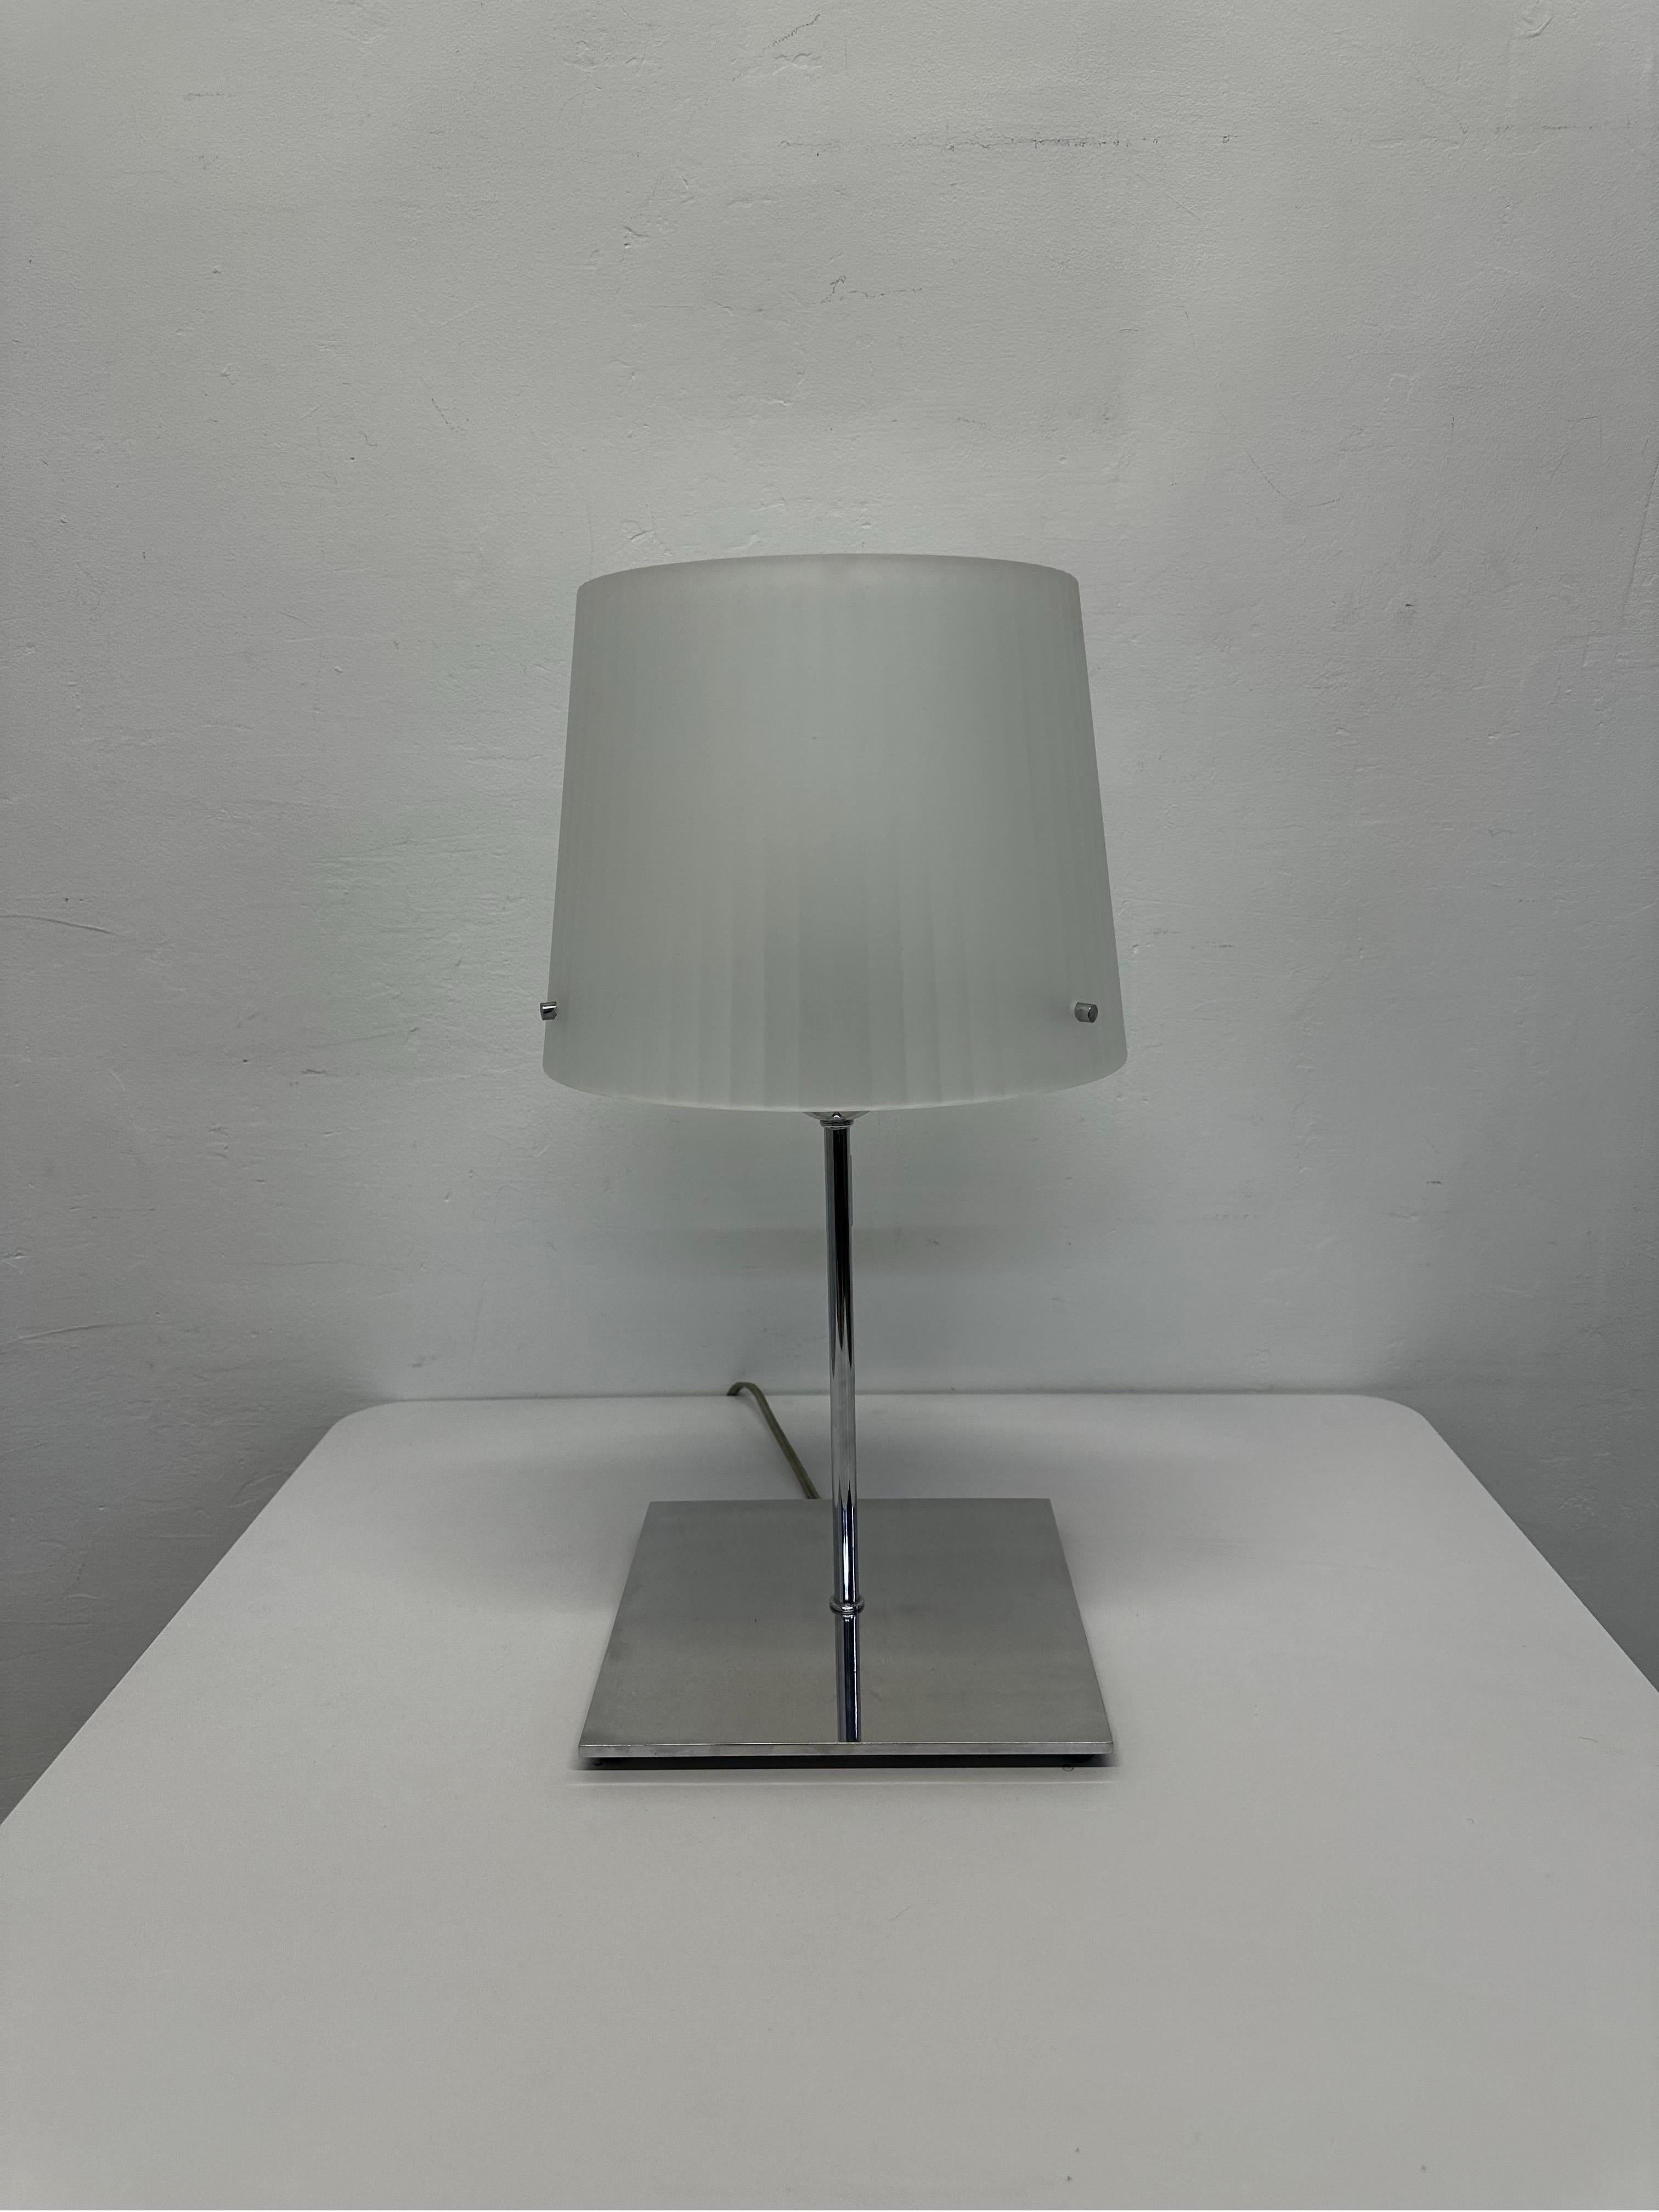 Bolo desk or table lamp designed by Peclar Nalbandian & Guy Burr for Artemide.

Table standing luminaire for diffused incandescent lighting. Diffuser in handblown, ribbed opal white glass base in polished aluminum.